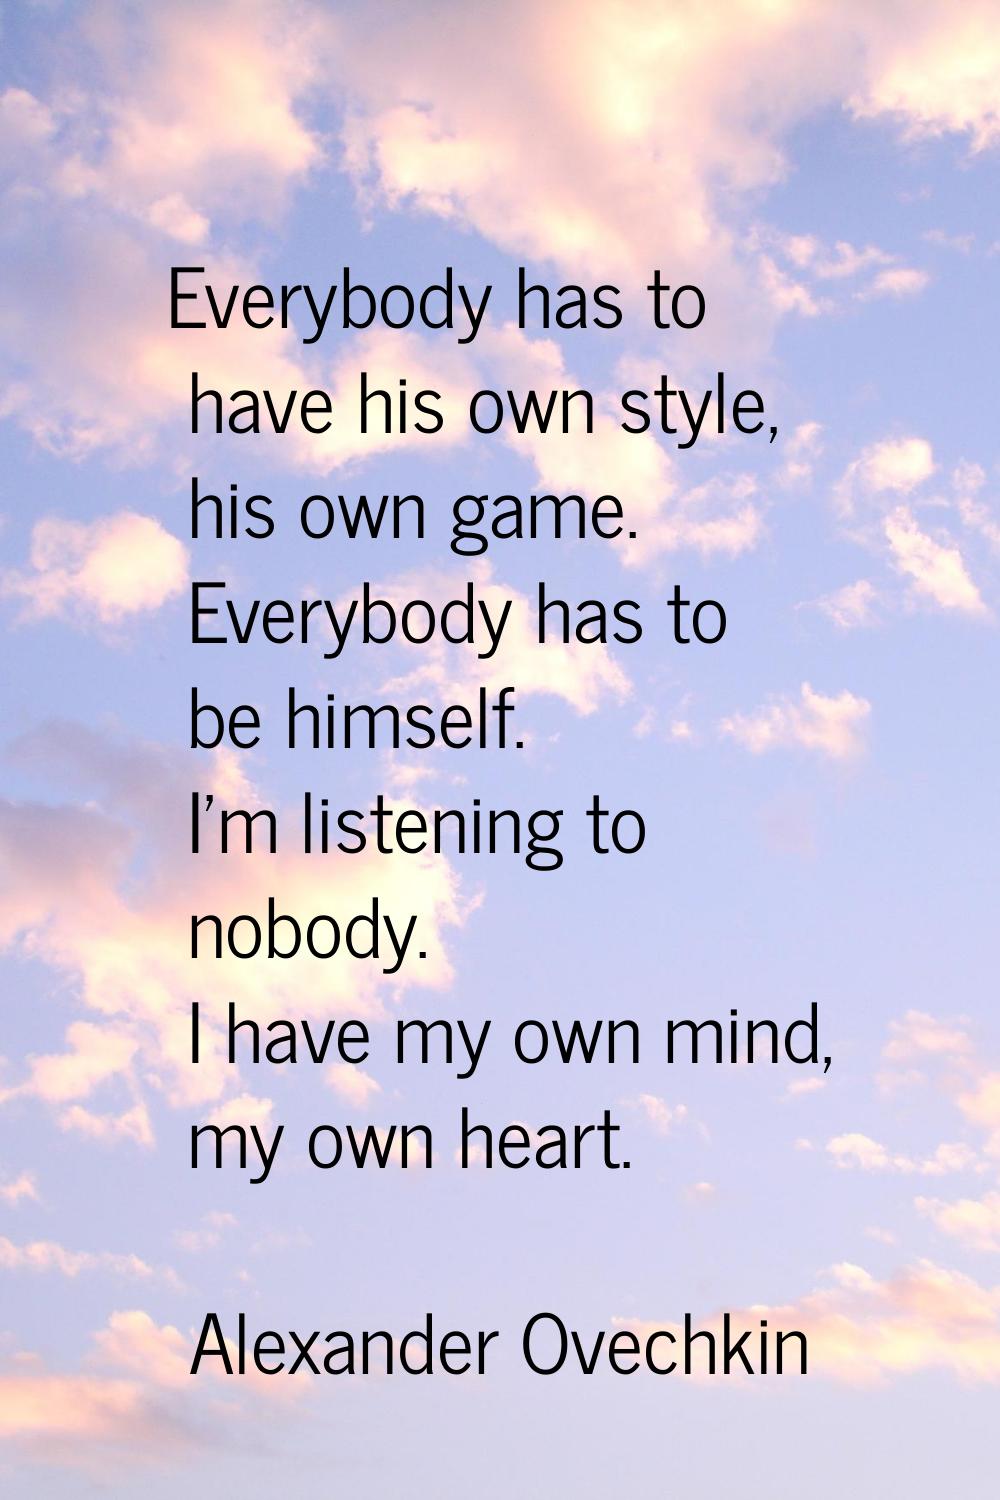 Everybody has to have his own style, his own game. Everybody has to be himself. I'm listening to no